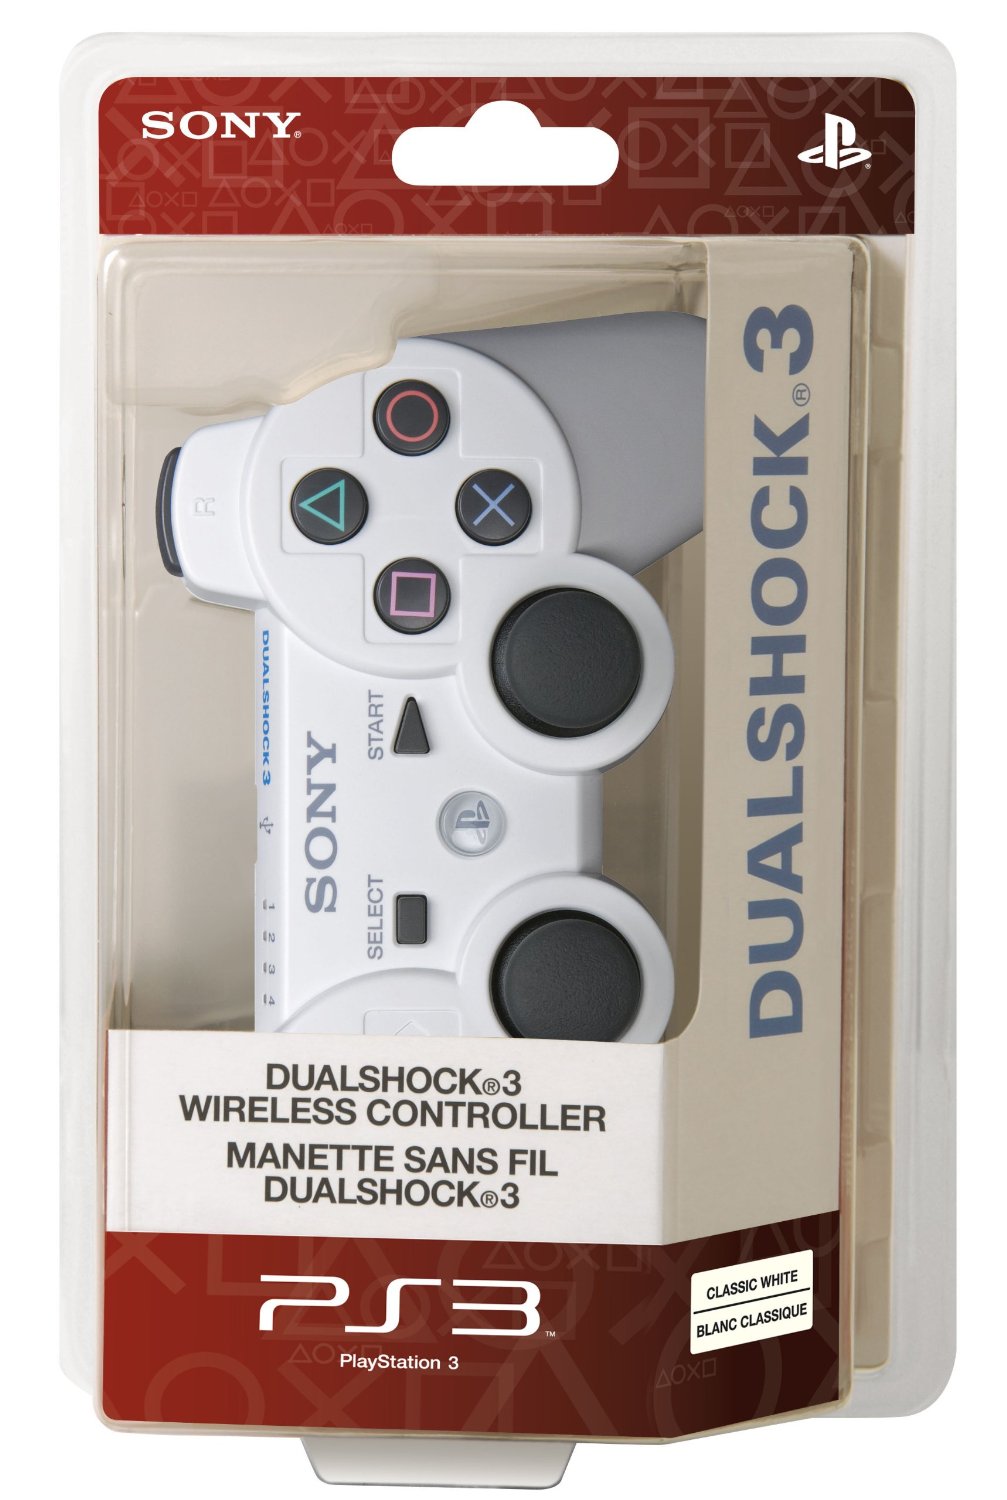 PlayStation 3 Dualshock 3 Wireless Controller (Classic White)